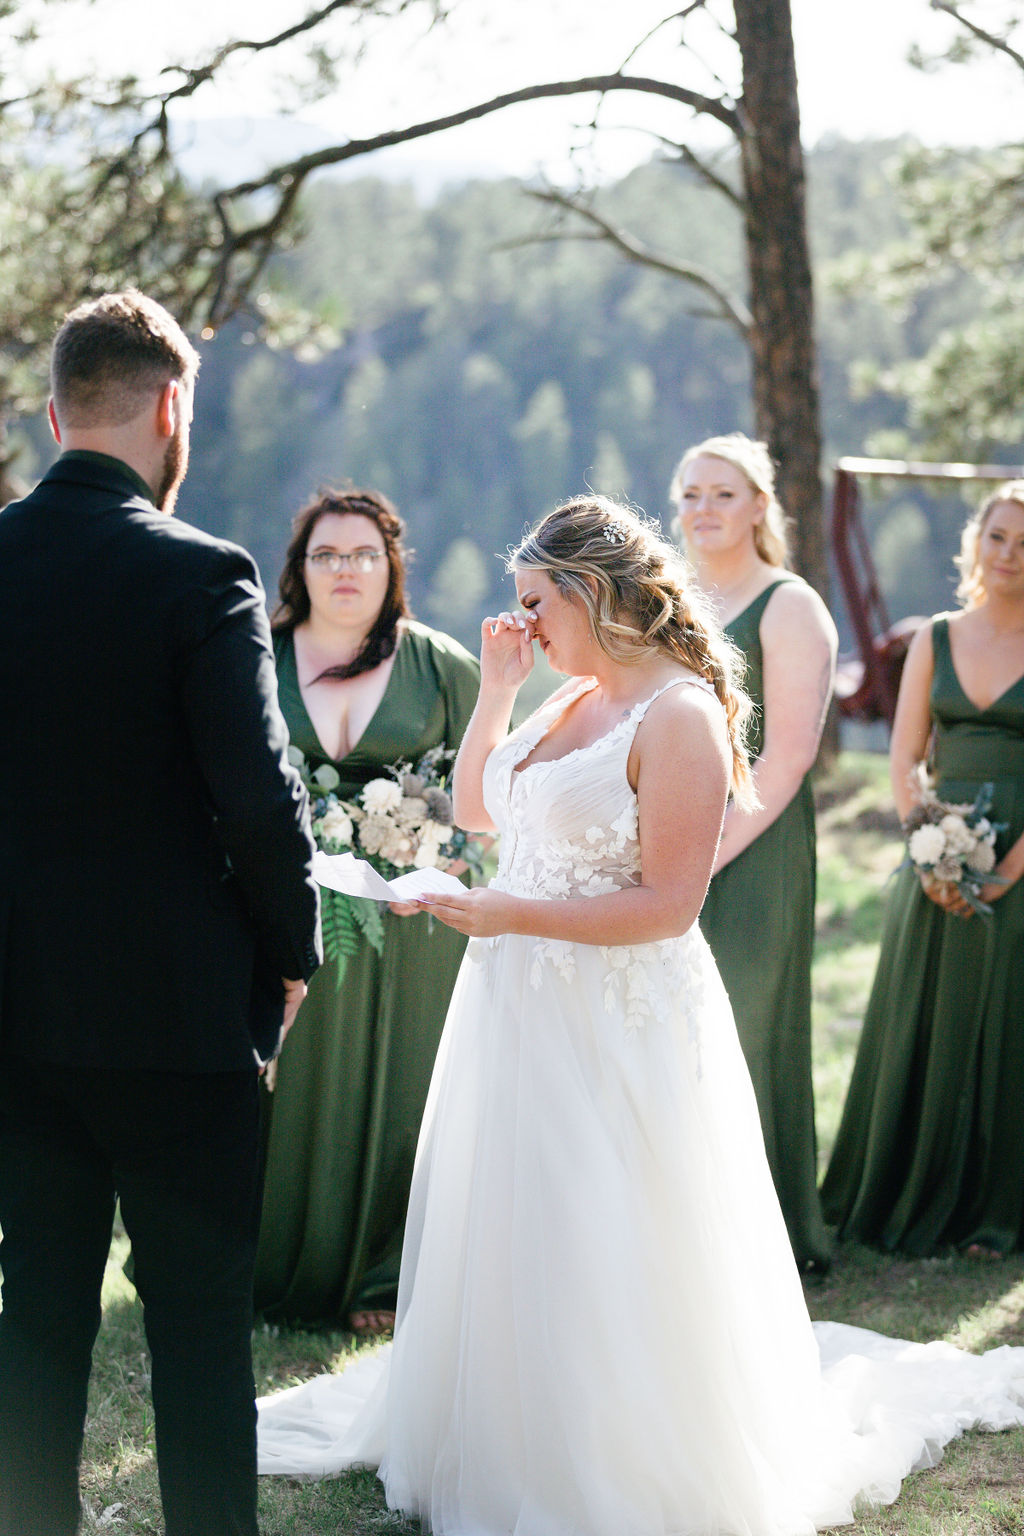 A Laid Back, Rustic & Outdoor Intimate Wedding Day 